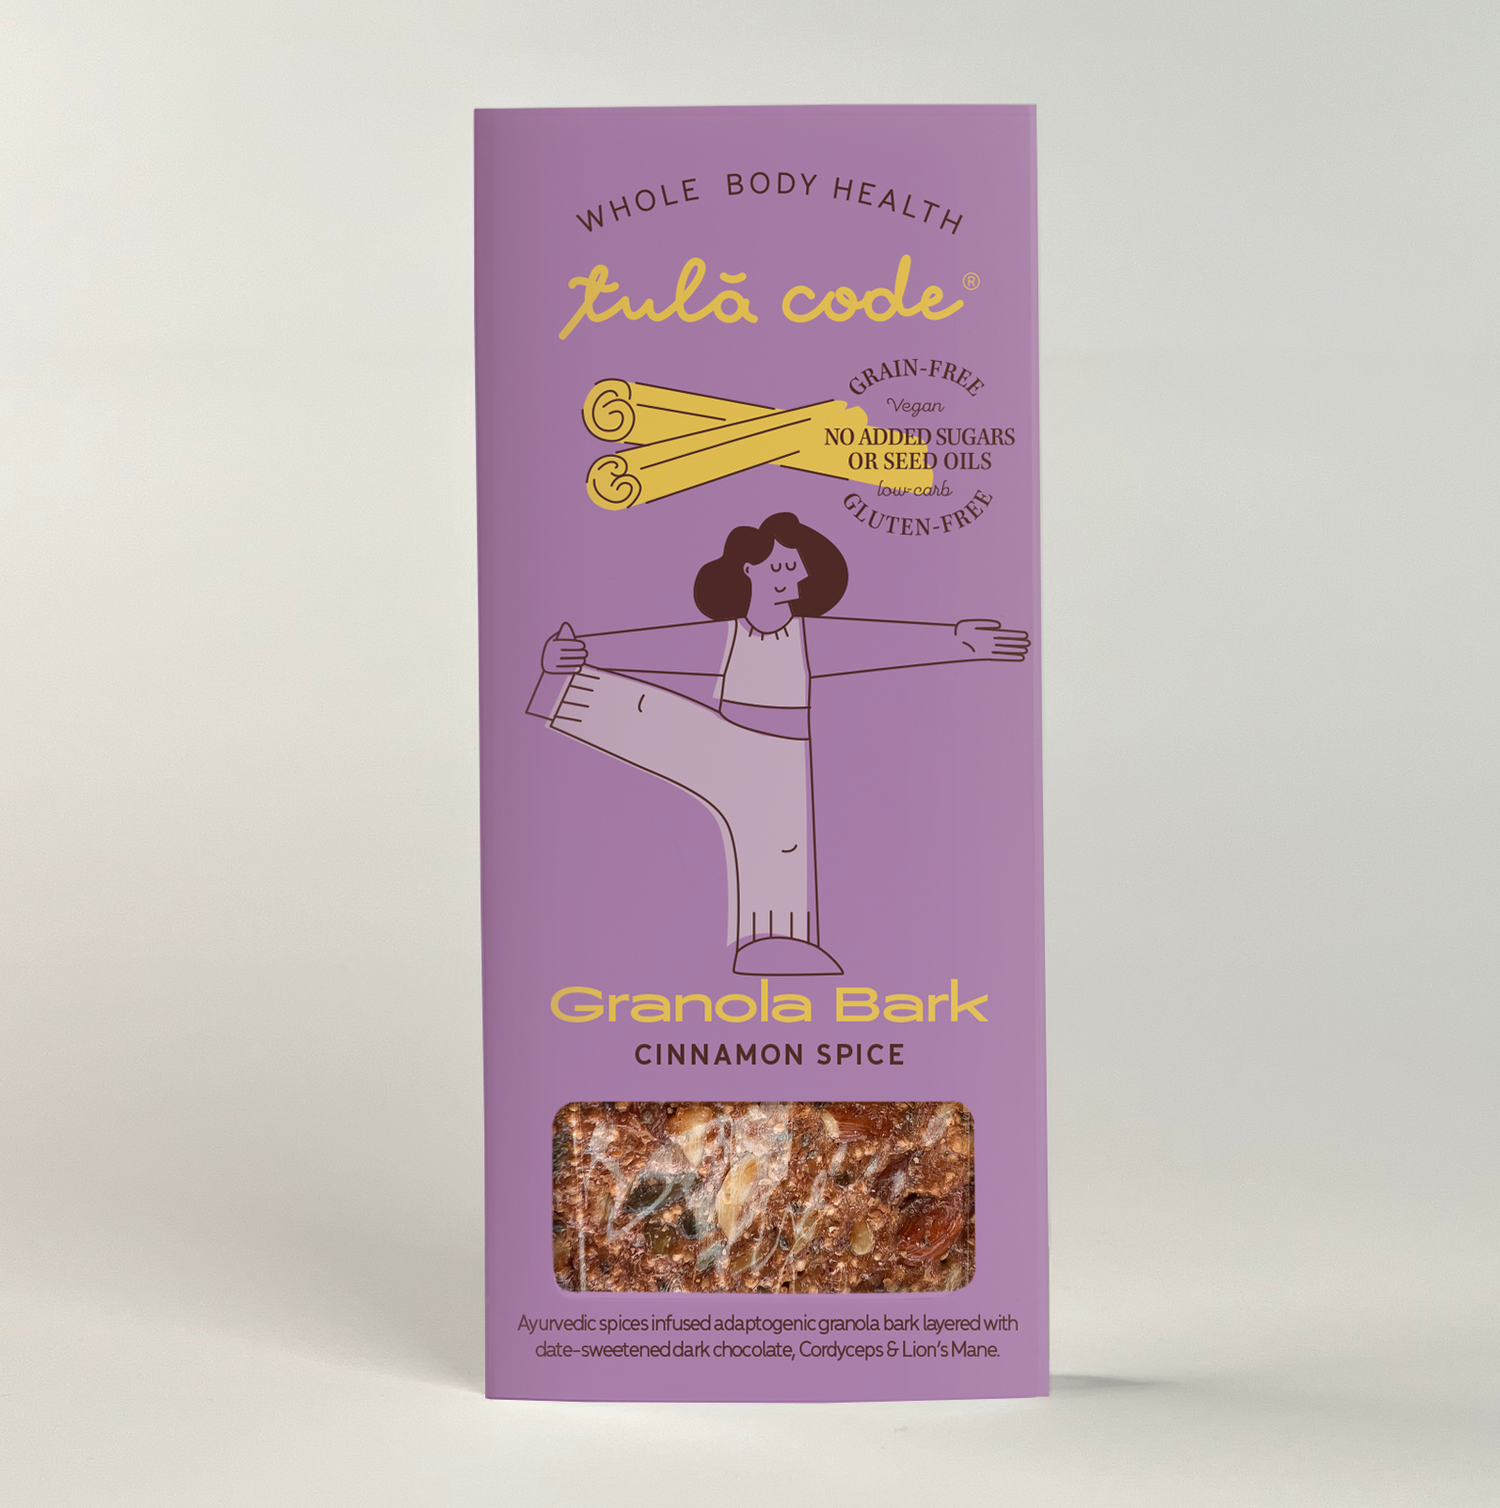 The image shows the packaging of our cinnamon spice granola bark. It is purple, with a yellow accent for the cinnamon and the type that reads &